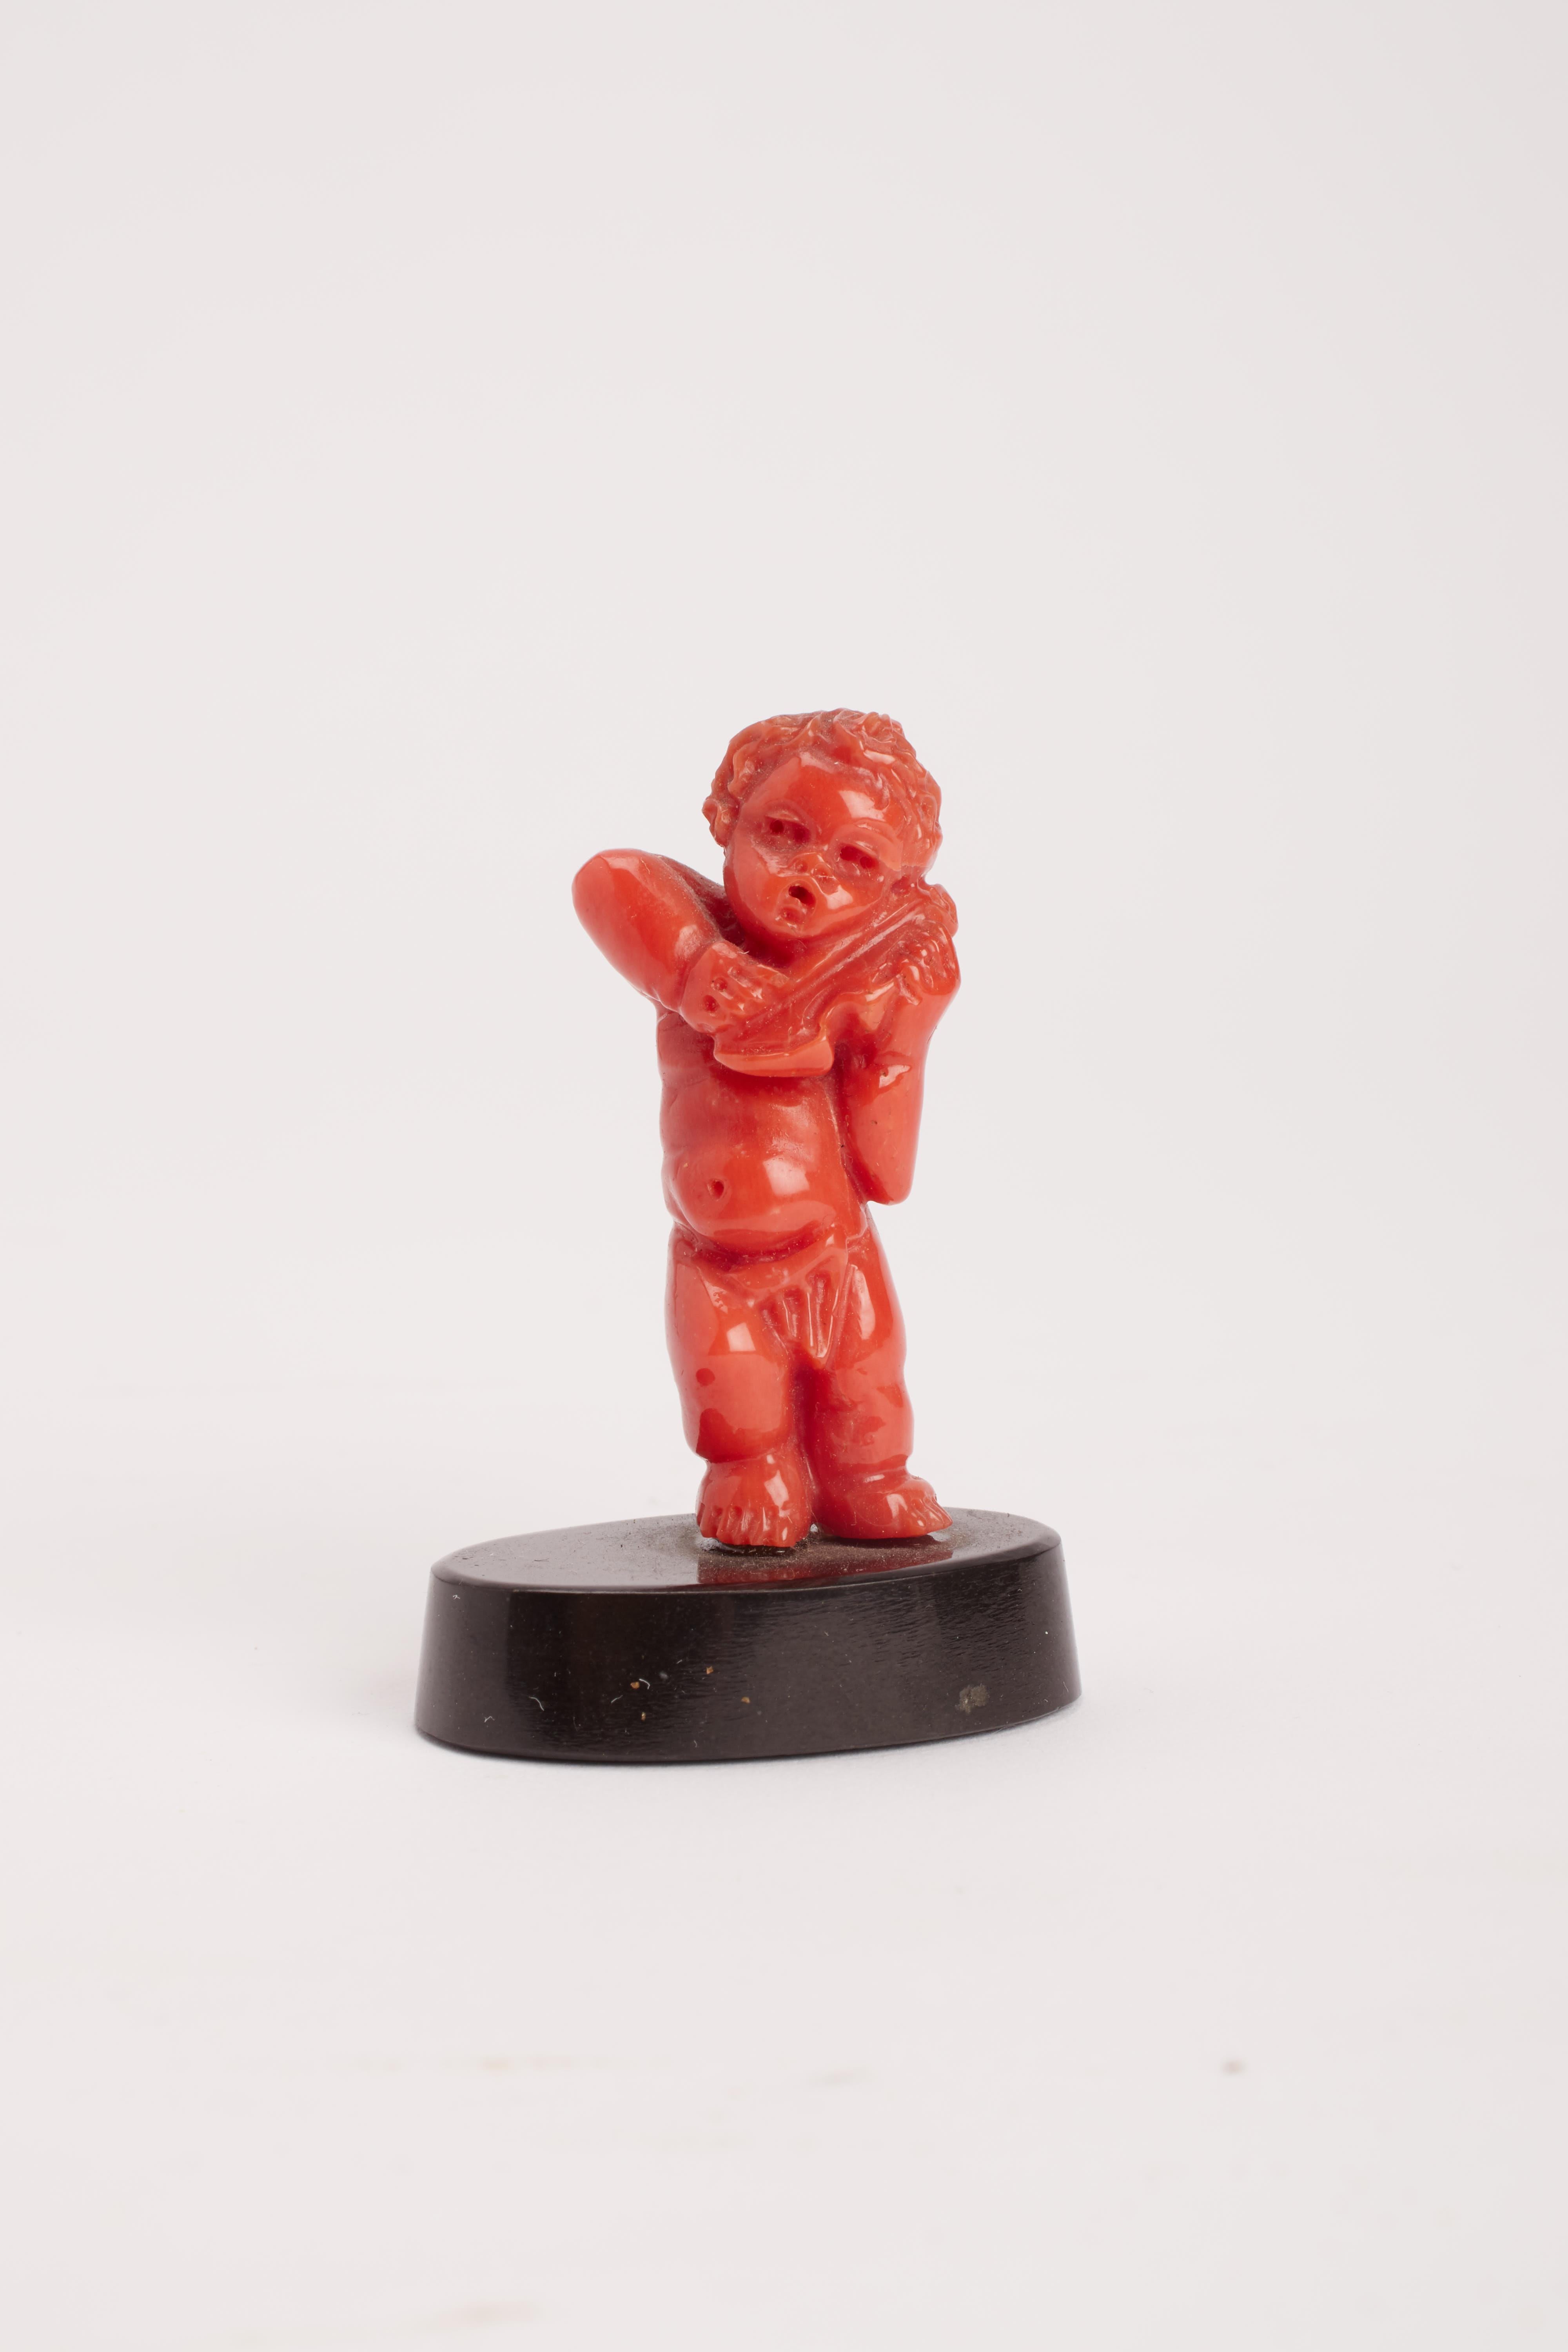 Grand Tour sculpture depicting a little putto playing a violin, made out of Mediterranean sea red coral. Black onyx base. Neaples, Italy 1860 ca.